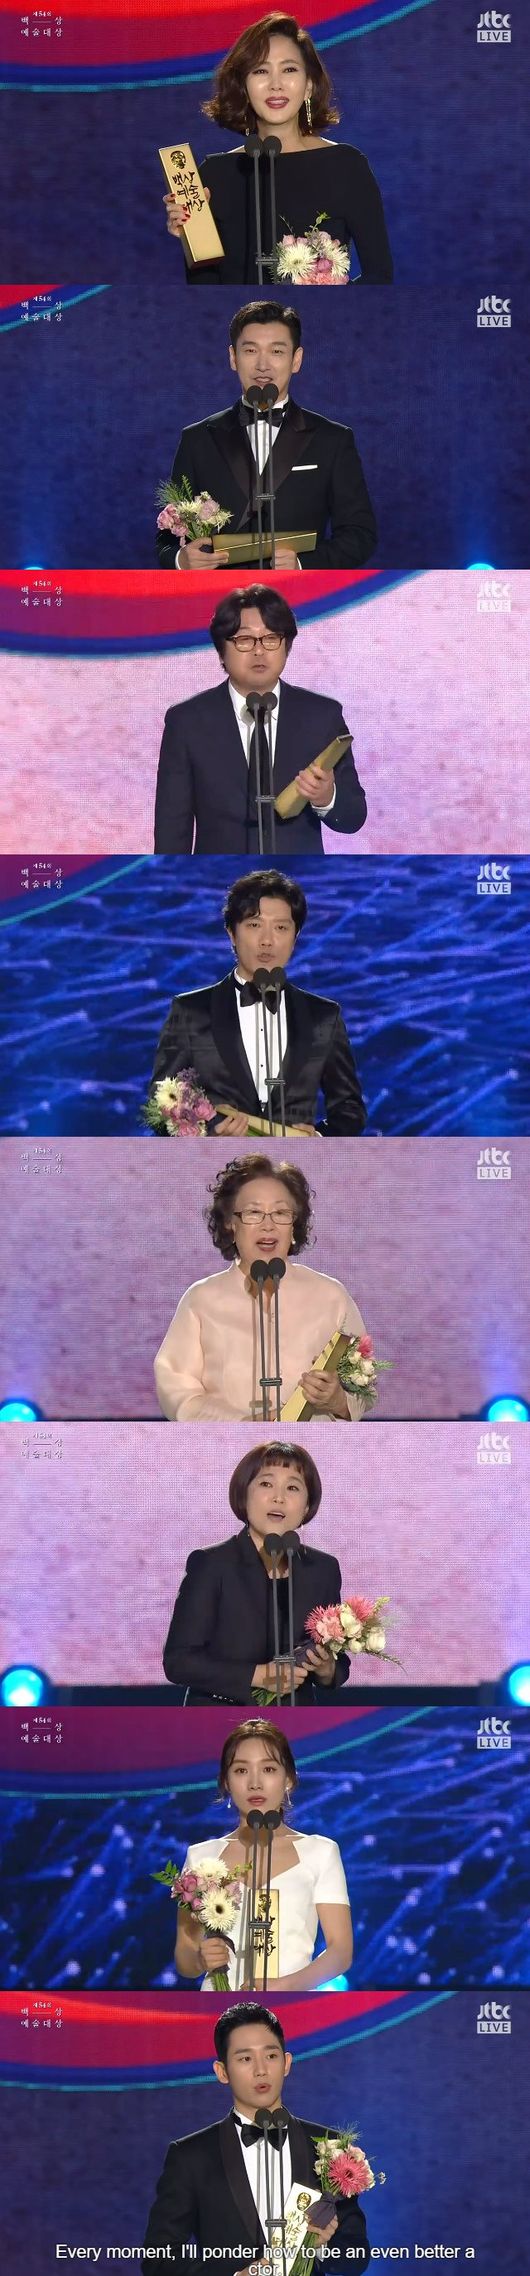 The Baeksang Arts Awards, which celebrates and encourages the achievements of the protagonists who have shined in the Korean film industry and broadcasting industry, have received 54th anniversary, and there have been many impressive awards of stars.In this unusual Baeksang Arts Awards, there were many meaningful opinions as the works with exceptional social meaning won the grand prize.I looked back on the meaningful moments at the 54th Baeksang Arts Awards held on the 3rd. ▲ The best award for TV category Misty Kim Nam-joos recall of the high-ranking award was not the most memorable award at the Baeksang Arts Awards.In JTBC Misty, he was disassembled as a Goh Hye-ran anchor who does not cover the water for justice. He showed his tears when his name was called. He said, I was happy to live in Goh Hye-ran for the past six months.I was really lucky to meet Goh Hye-ran, who had nothing as an actor.I am really grateful to Mr. Husband Kim Seung-woo. He soon turned to Goh Hye-ran and said, I will continue to approach viewers with fair and transparent acting. He received a warm applause. ▲ TV Best Actor Award for Best Actor Jo Seung-woos Seasonal Promise. The award-winning Jo Seung-woo laughed because he did not hide his desire for the season.Jo Seung-woo said, I was so loved that I was happy all year.I am really grateful to my writer, bishop, and all actors, and I am curious to see if you have seen the secret forest.I wish I could go to season five personally.I would like to ask for your support so that the Secret Forest, which I personally enjoyed, can go to the season. The winners of the movie 1987, which deals with the true story of the best actor in the movie category and the male supporting actor 1987 Kim Yoon-seok and Hee-soon Park I was impressed.Hee-soon Park, who received the Best Supporting Actor in the Film Division, said, All the actors who participated in 1987 did it, but they appeared for those who sacrificed for democracy and did their best.I think this award is not an individual, but everyone who is together is receiving it together, and I think that the most leisurely of them is delivering the trophy. 